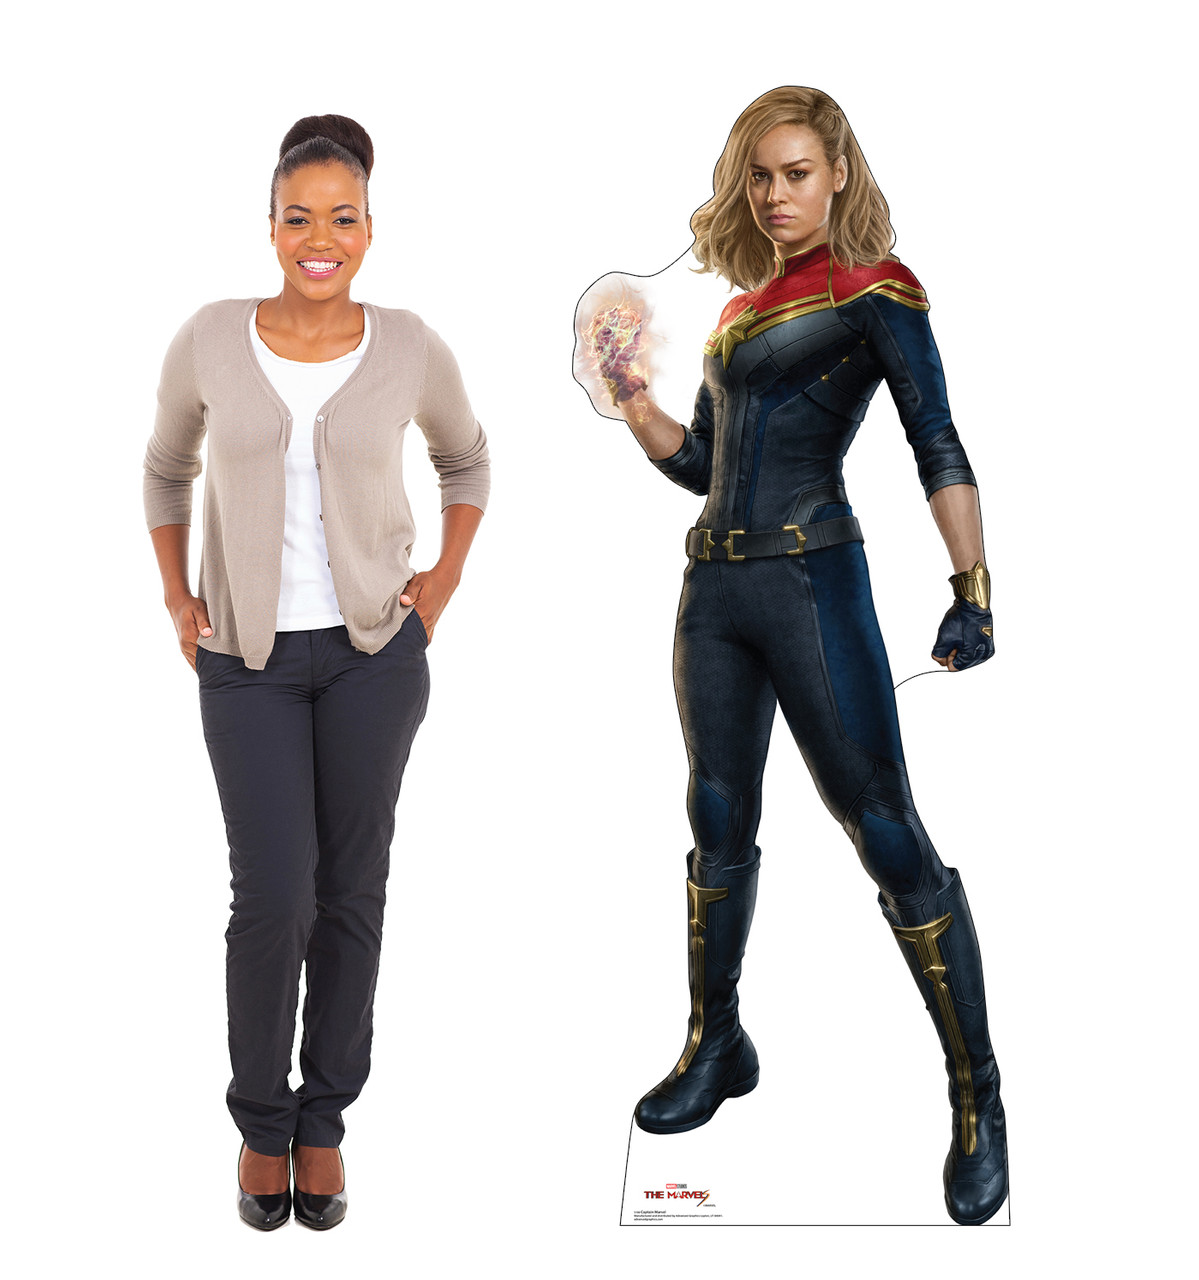 Life-size cardboard standee of Captain Marvel with model.